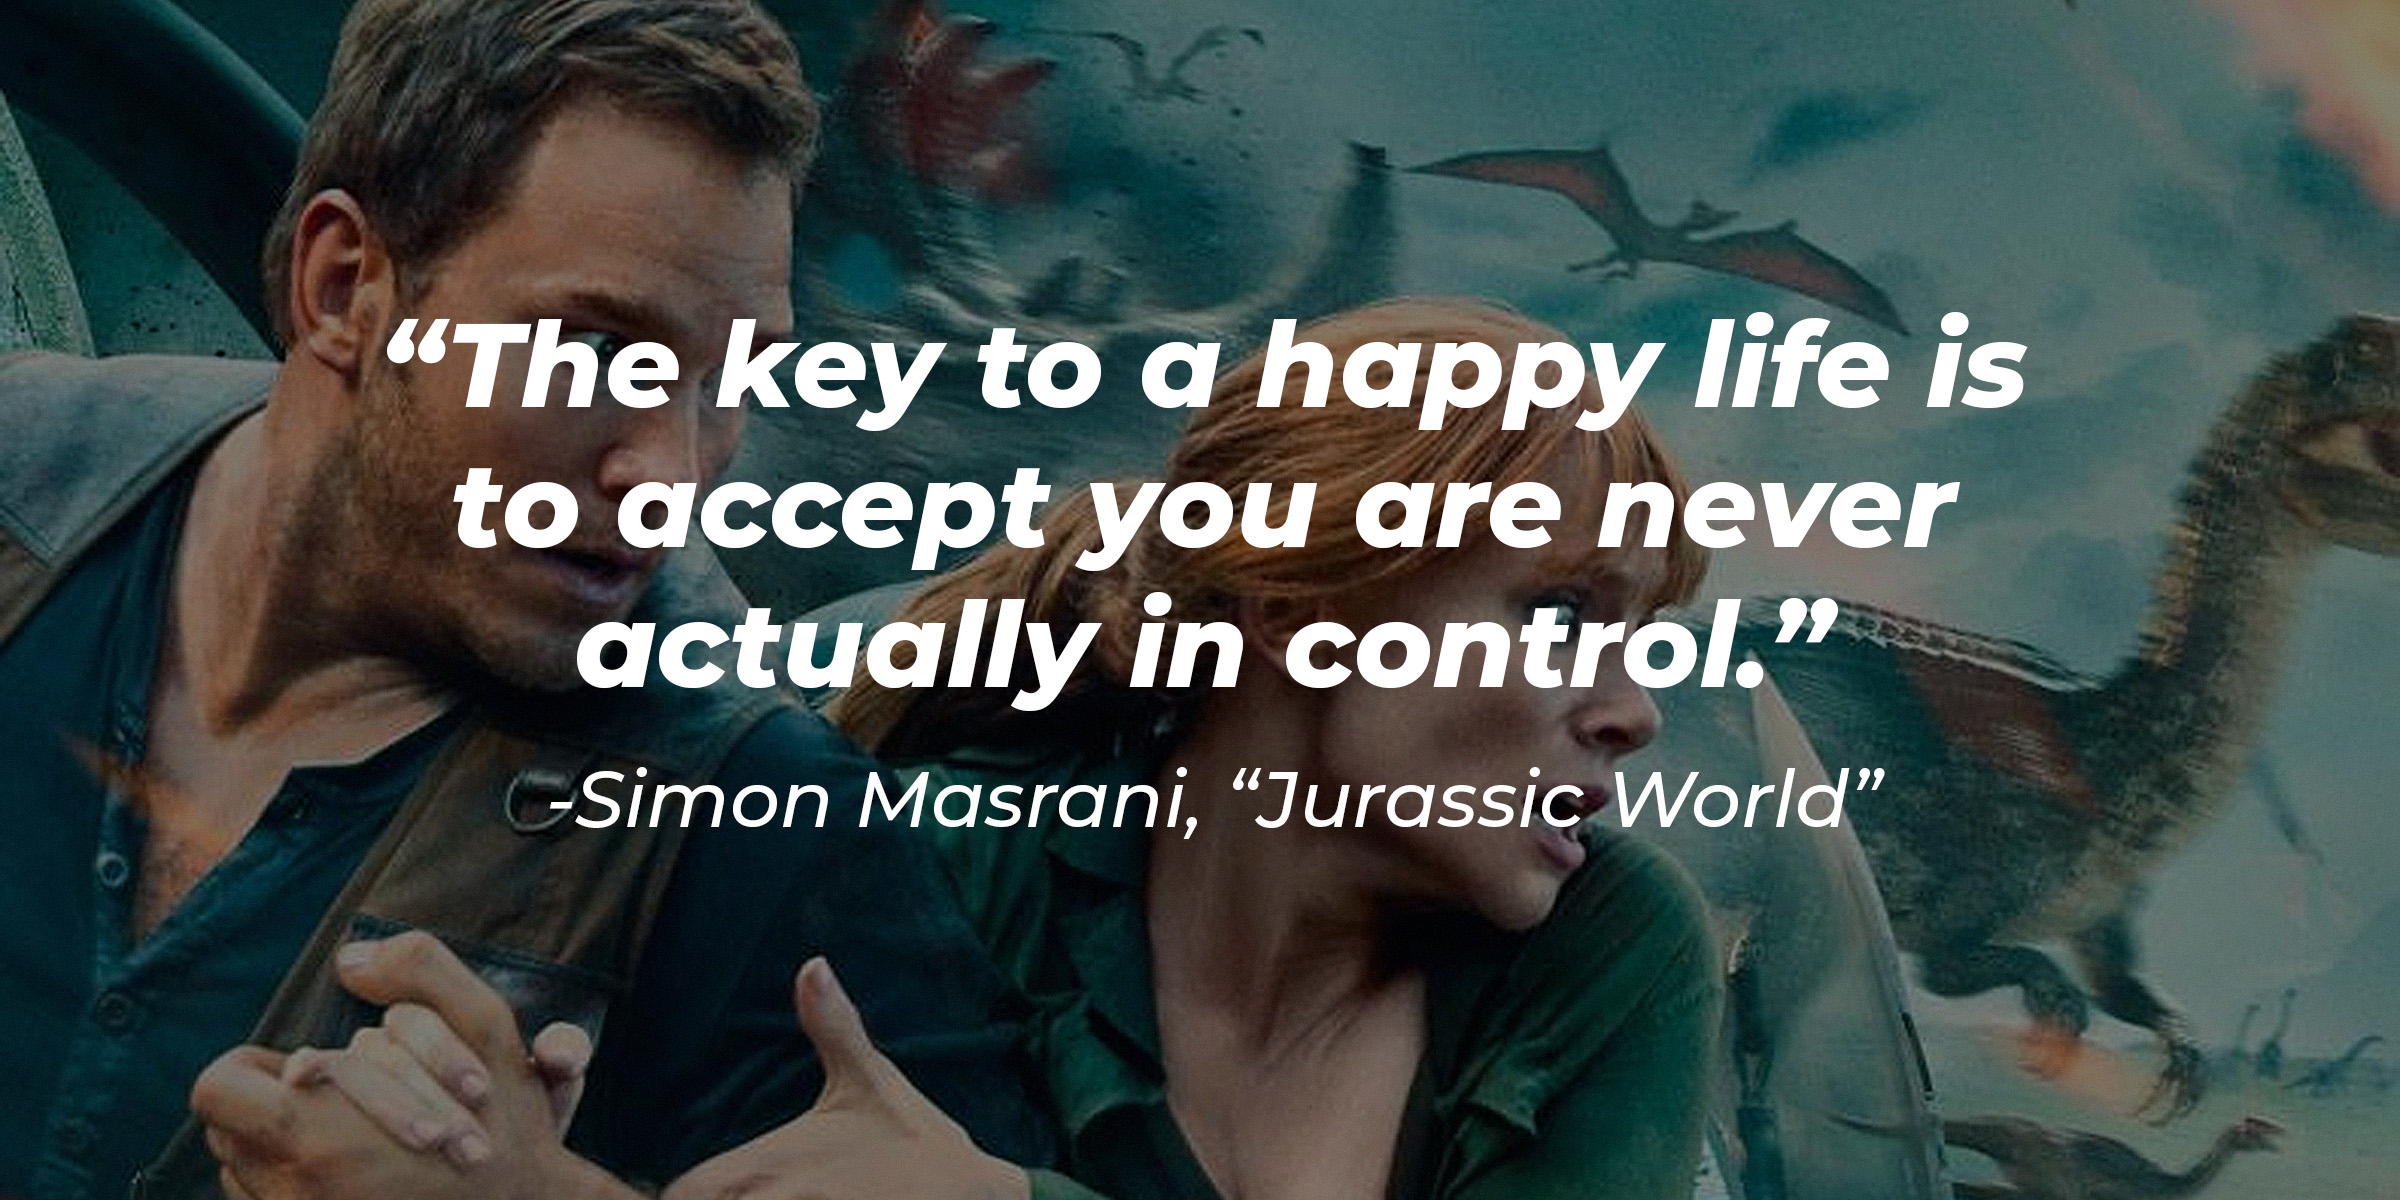 Simon Masrani's quote: "The key to a happy life is to accept you are never actually in control." | Source: facebook.com/JurassicWorld